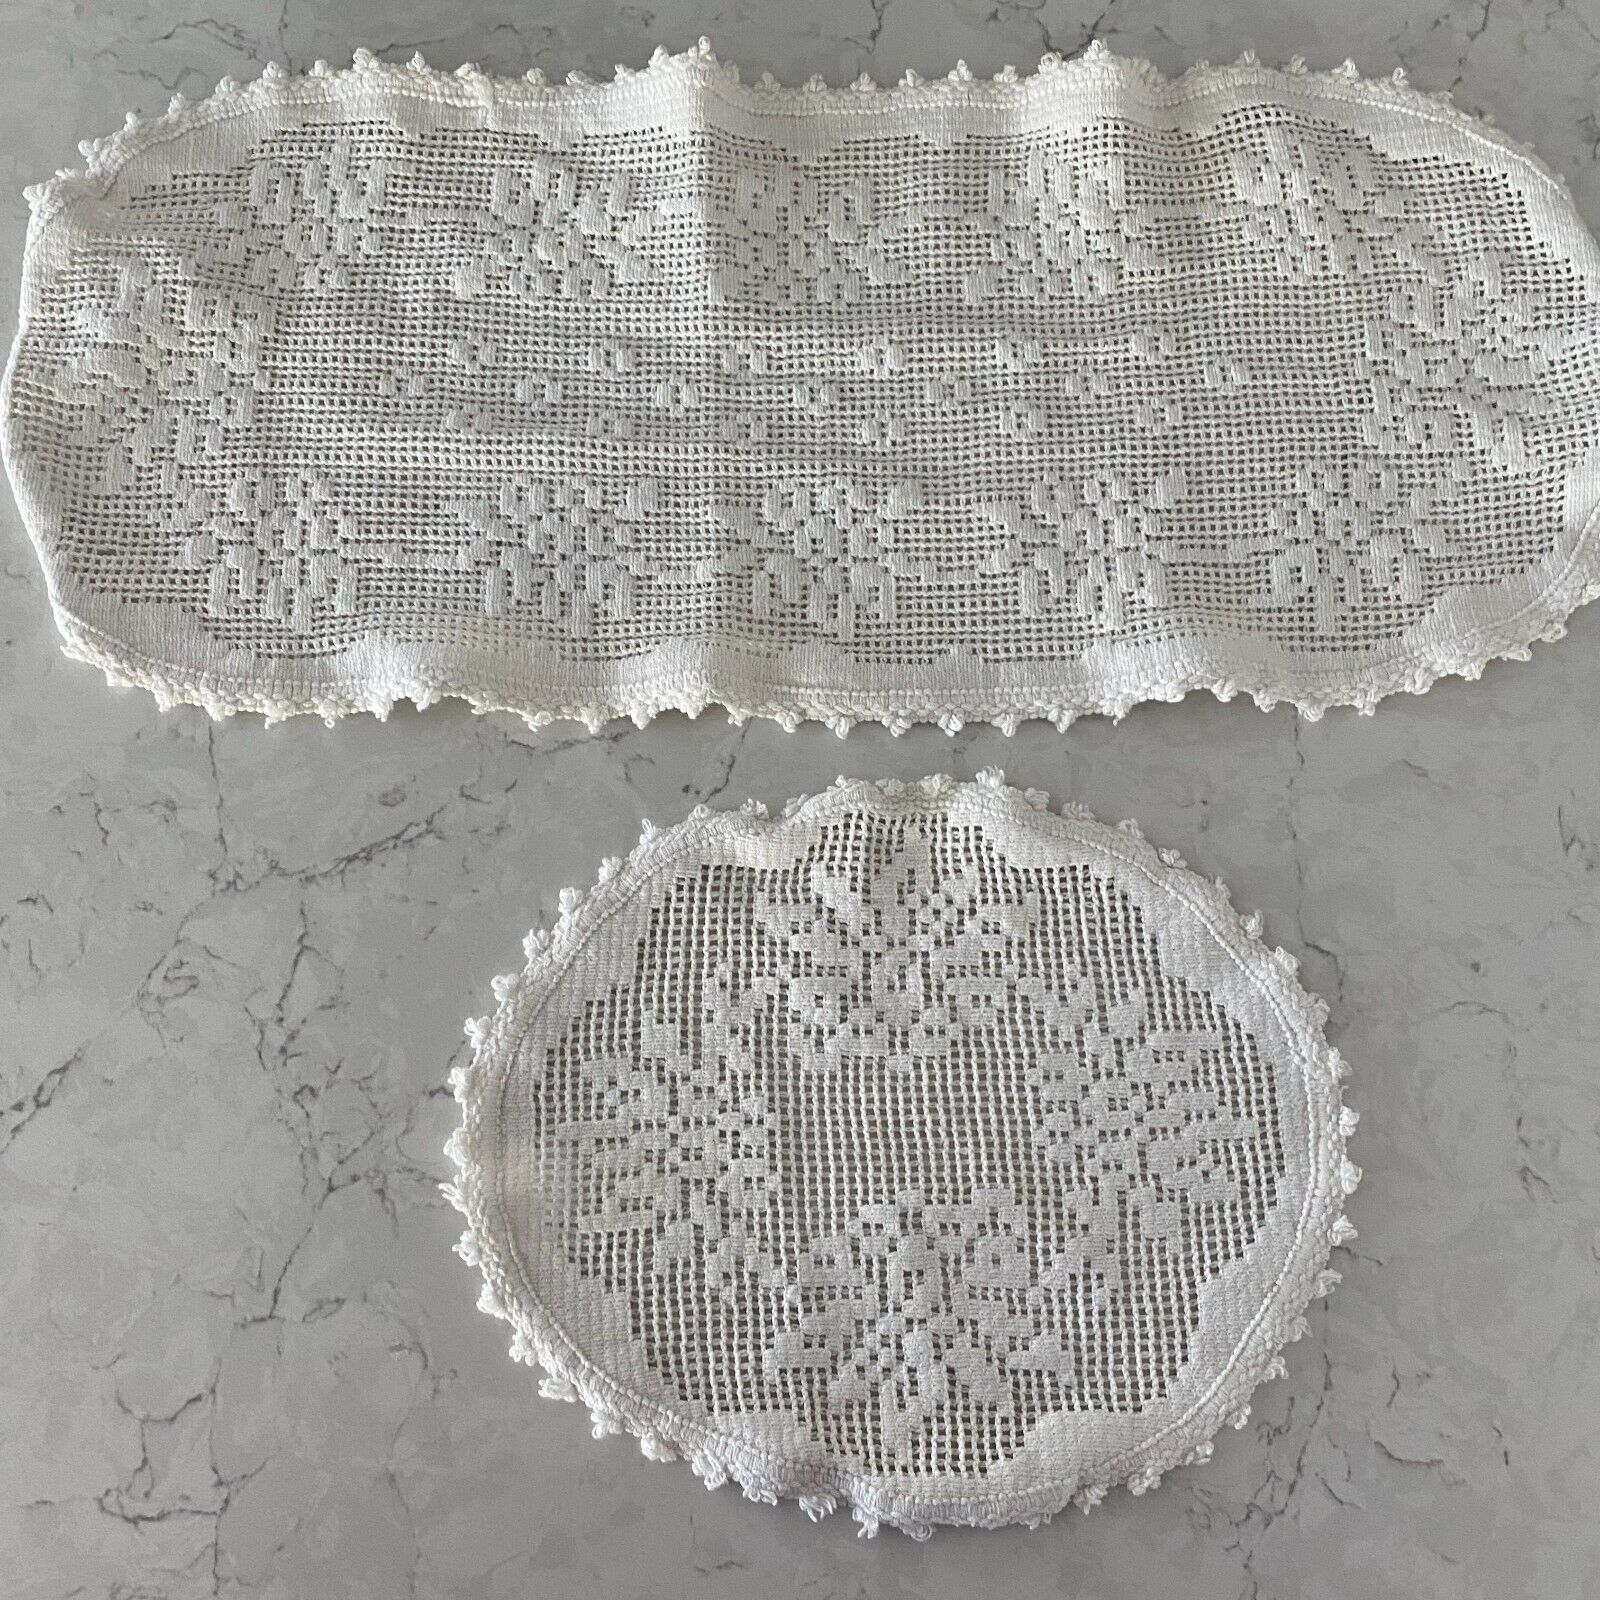 Off White Lace Crochet Doily Tablecloth Placemats Handmade Decorative Lot of 2